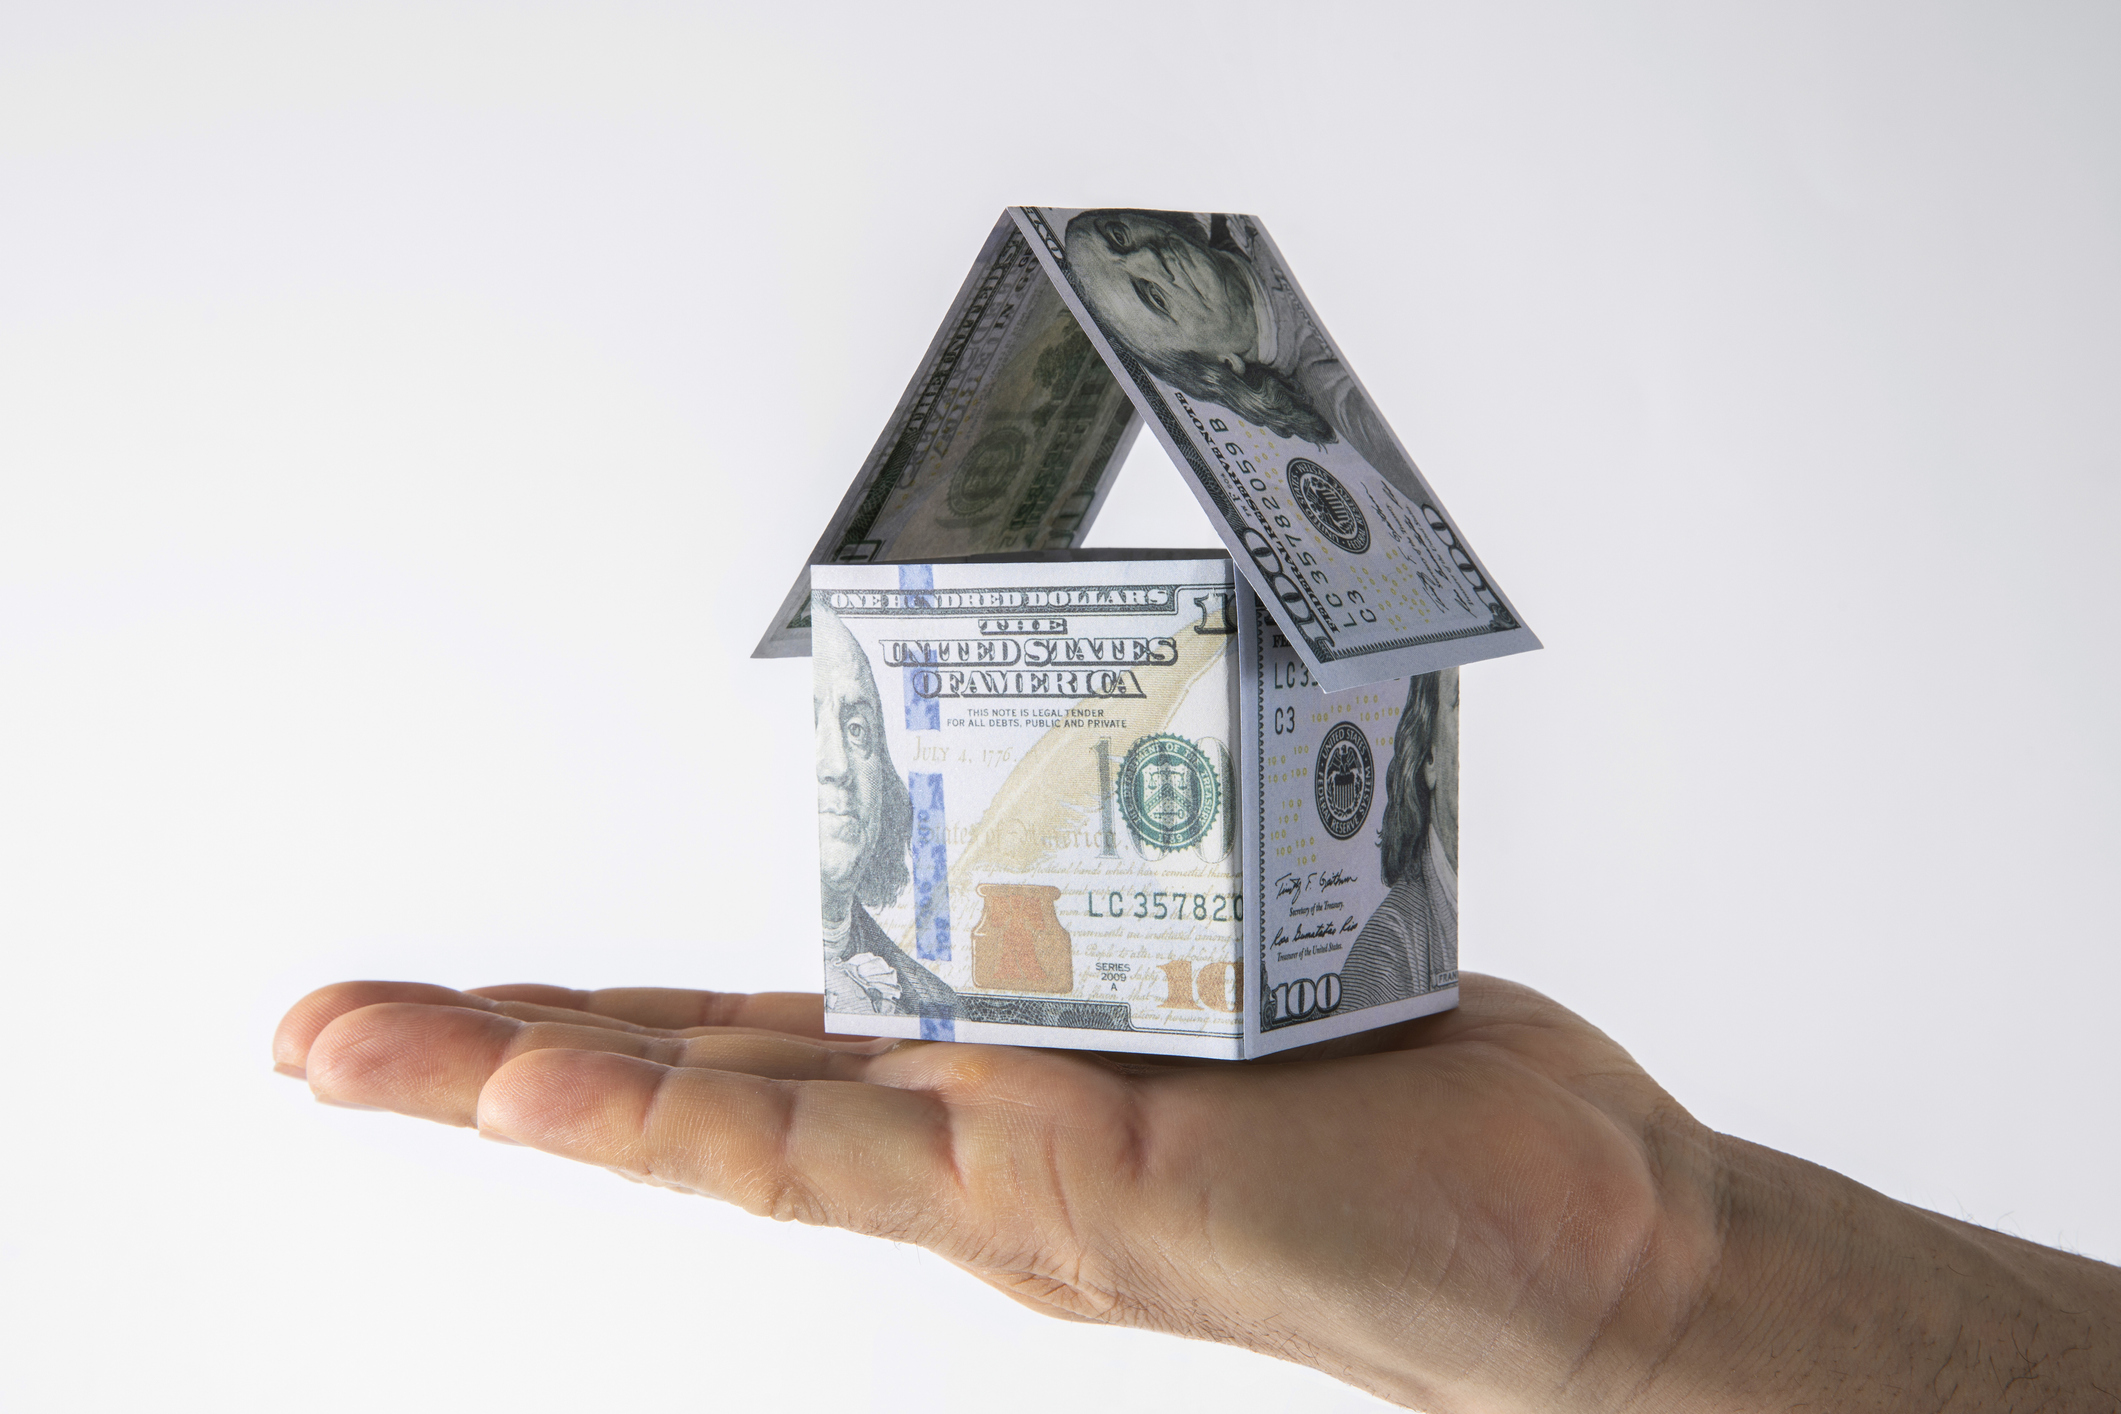 An open hand holding a small house-shaped structure made of hundred-dollar bills, symbolizing home equity and financial concepts discussed in the Southern Oregon real estate market blog.